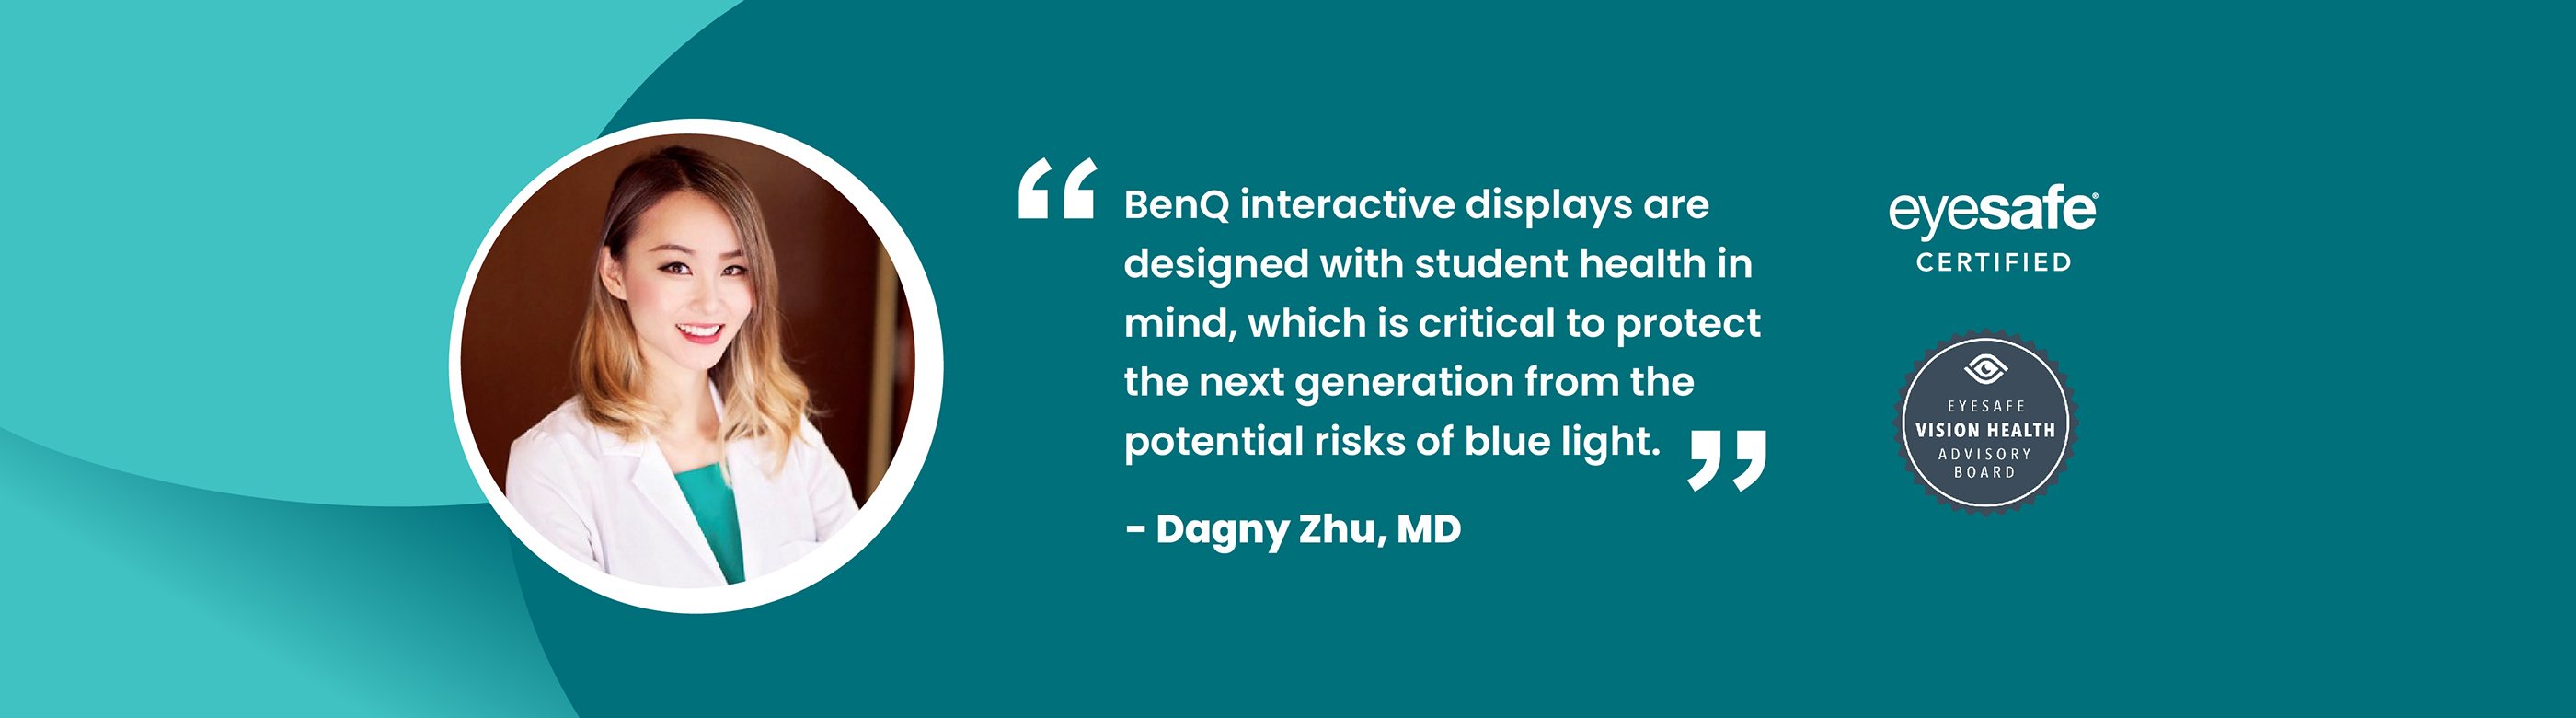 doctor recomendation for BenQ smart board 